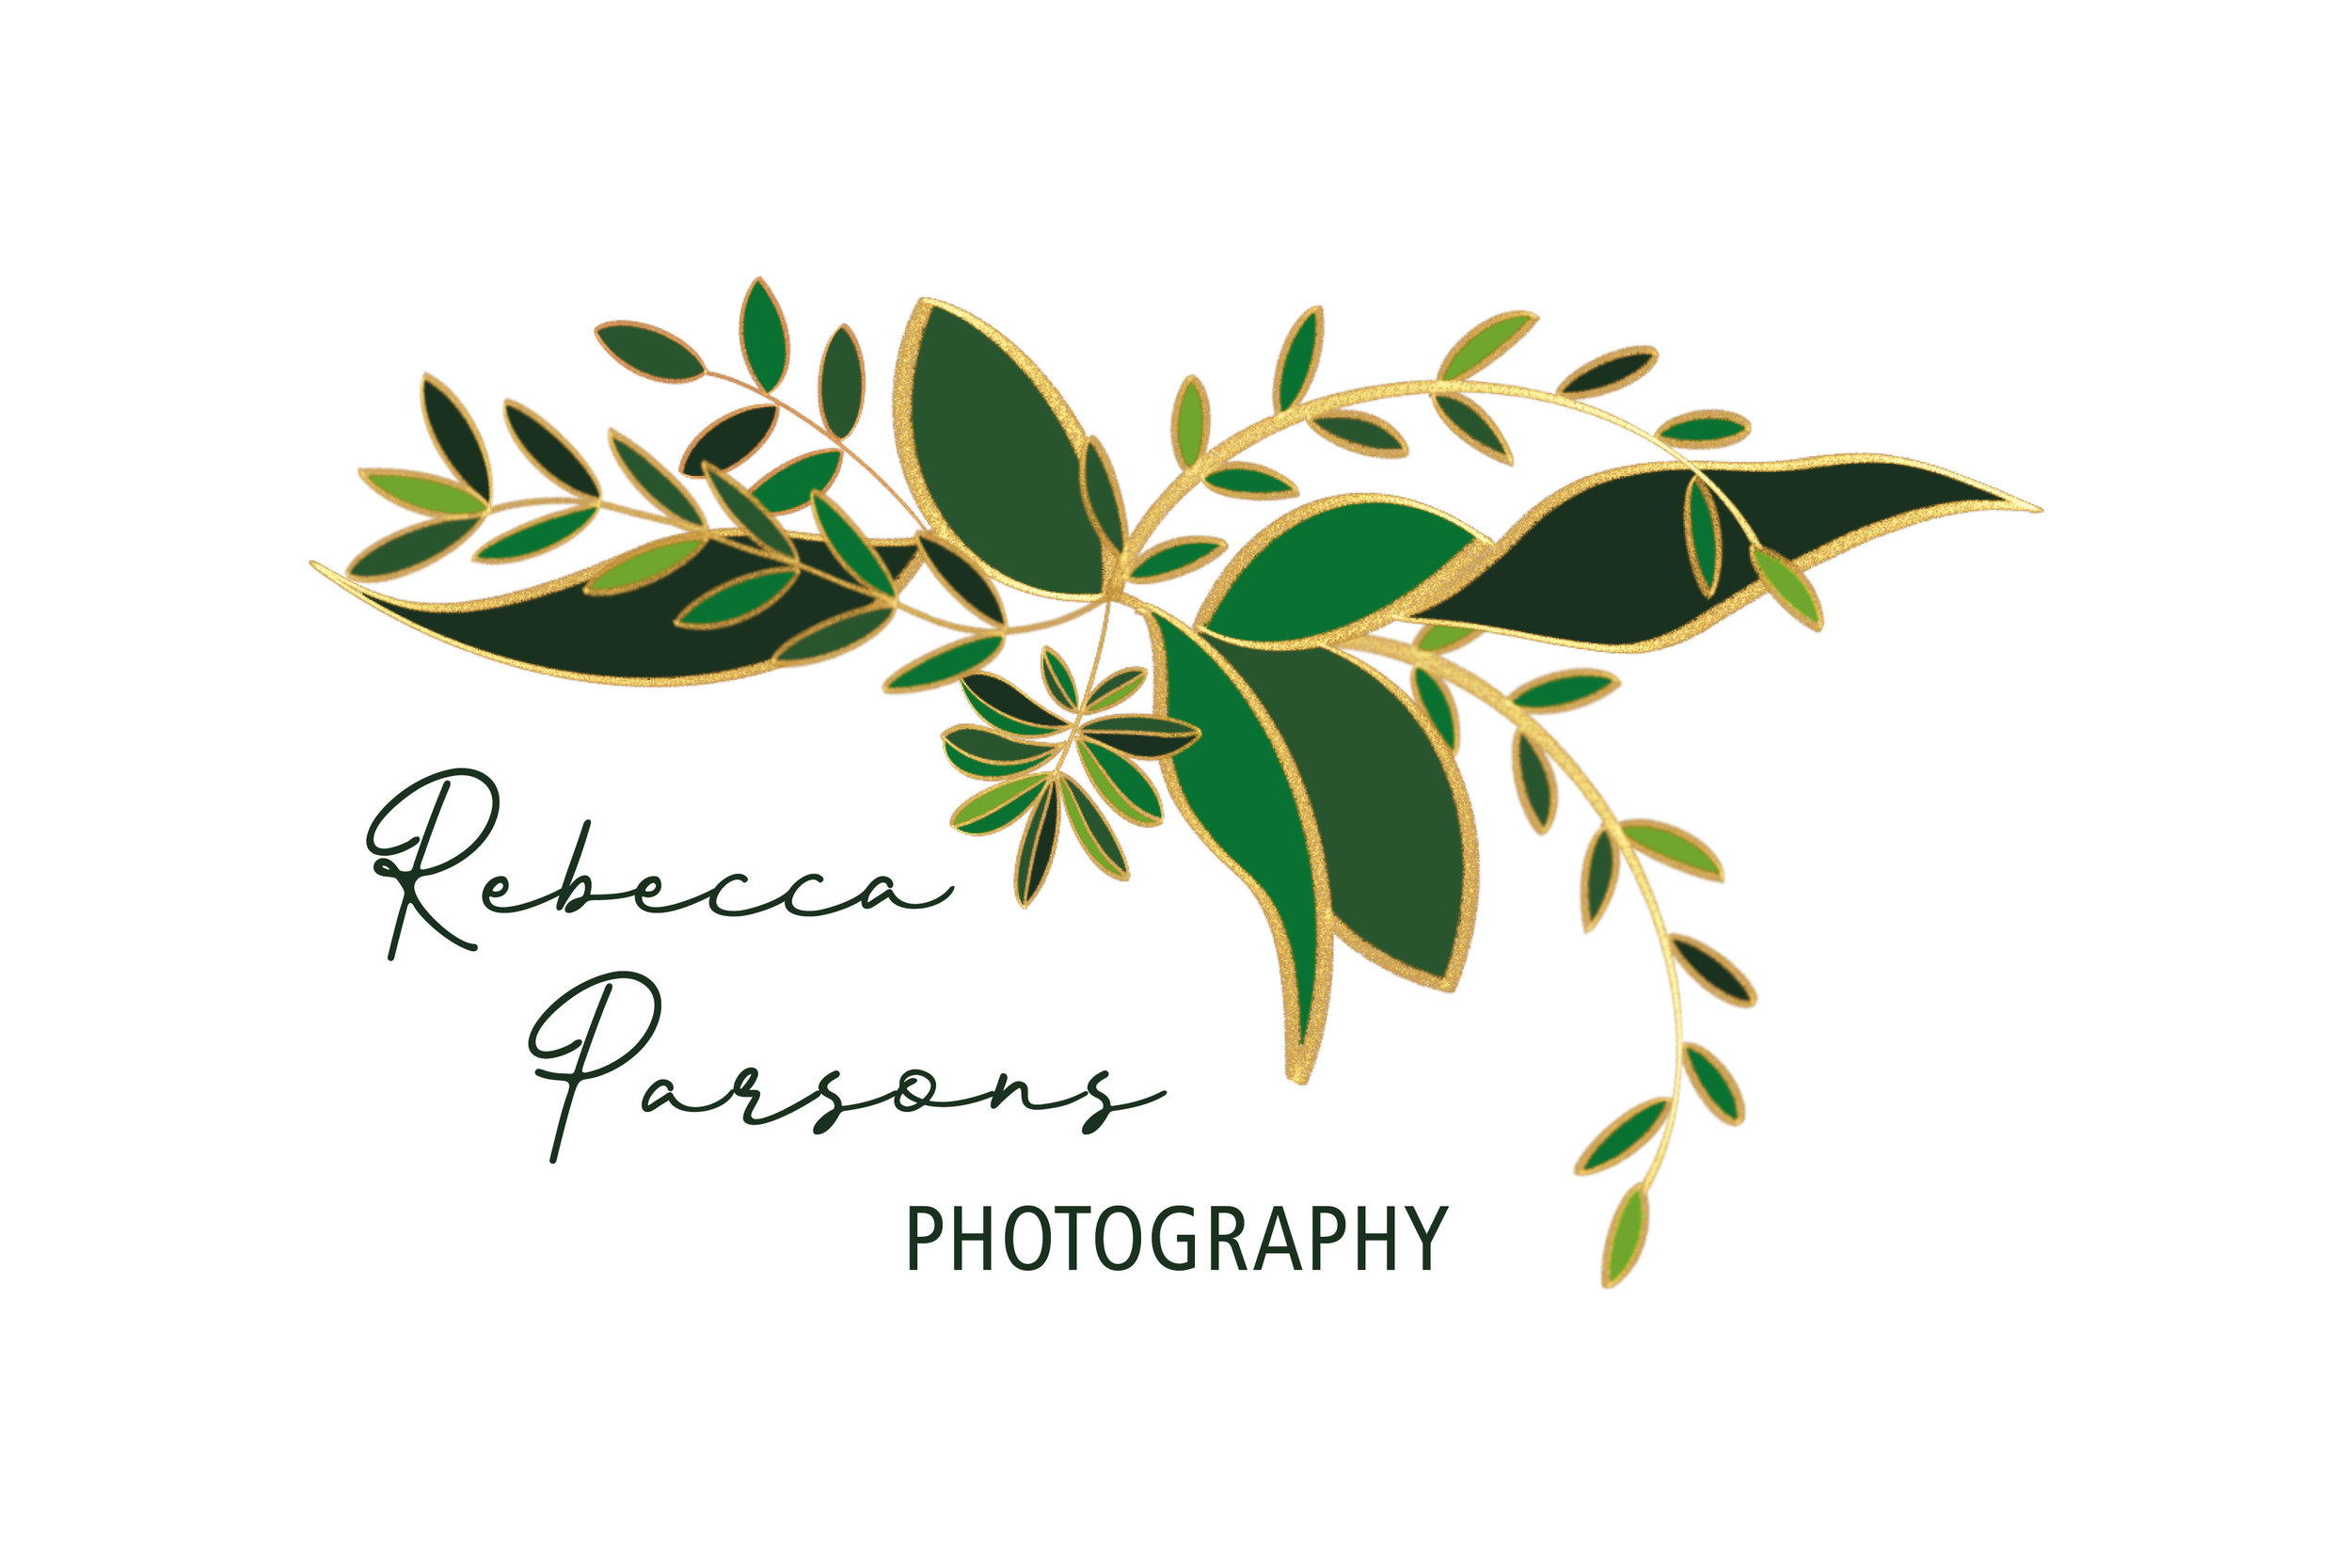 Rebecca Parsons Photography